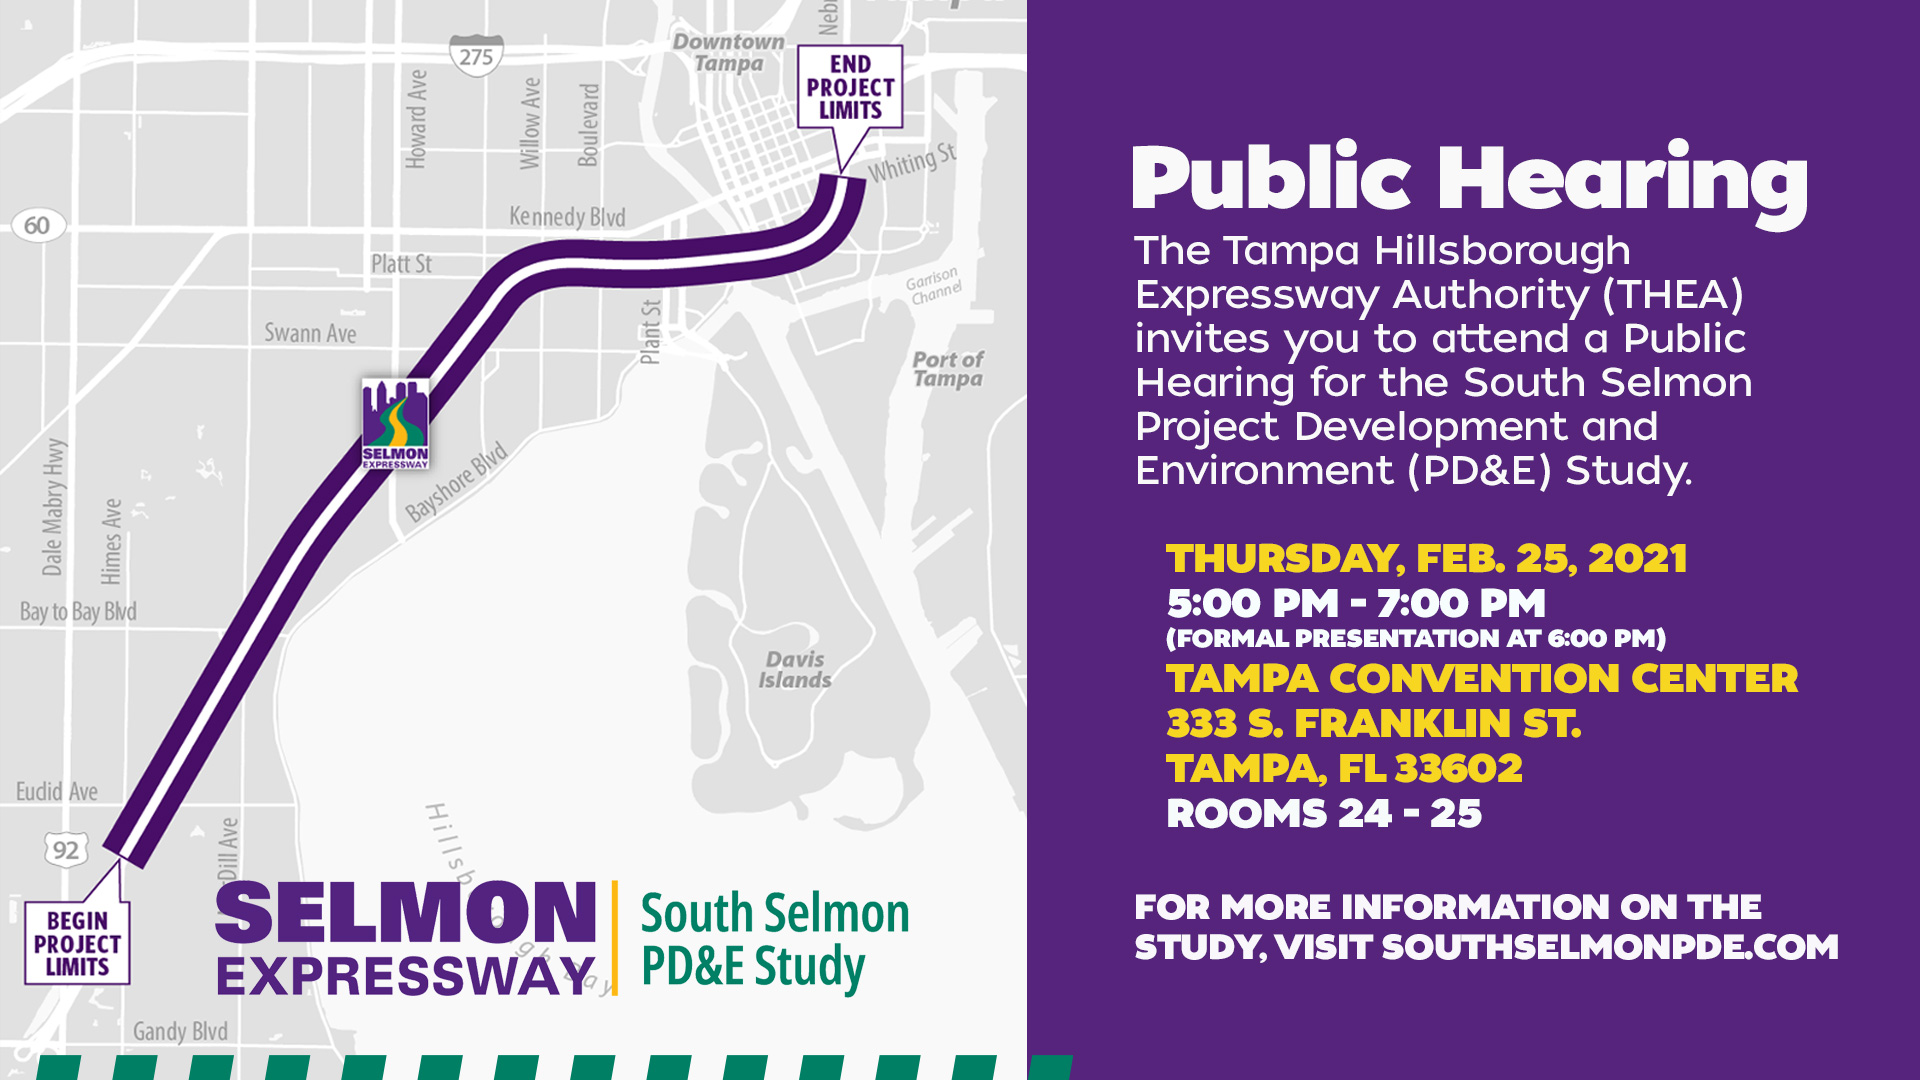 THEA to Hold Public Hearing for the South Selmon Project Development and Environment (PDandE) Study